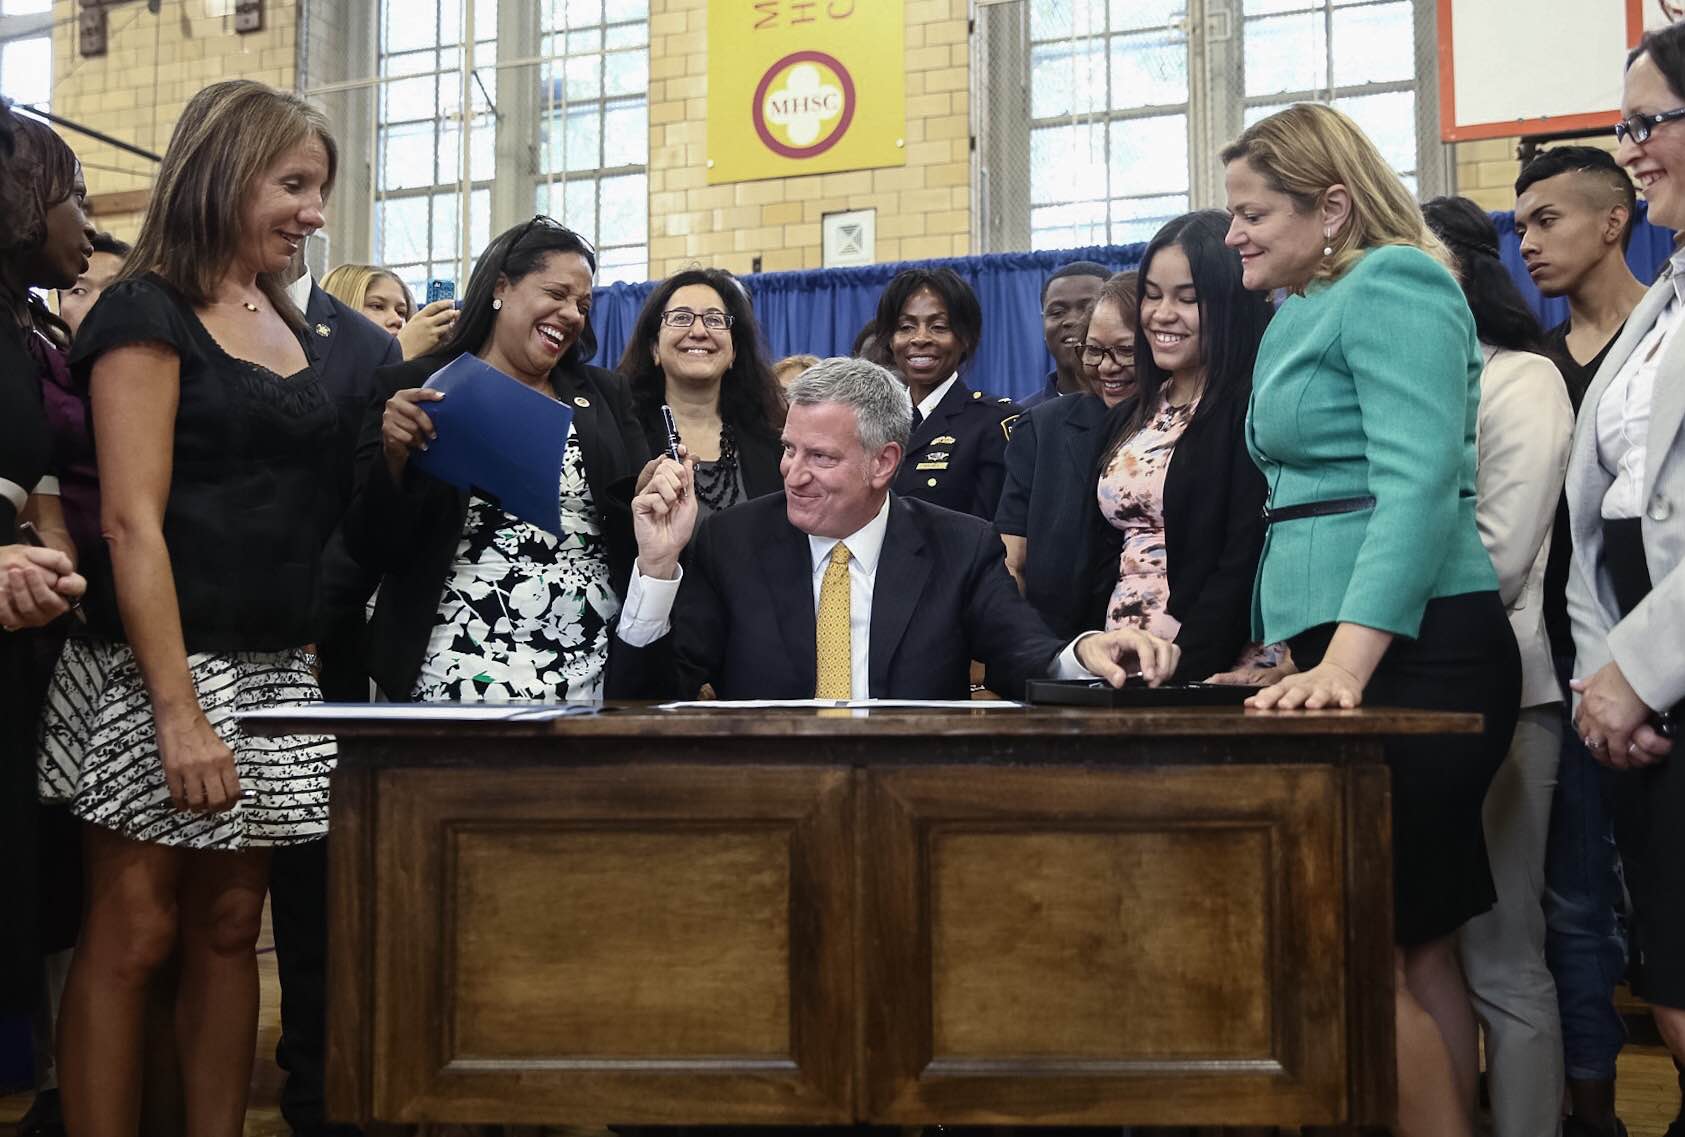 Today's bill signing.